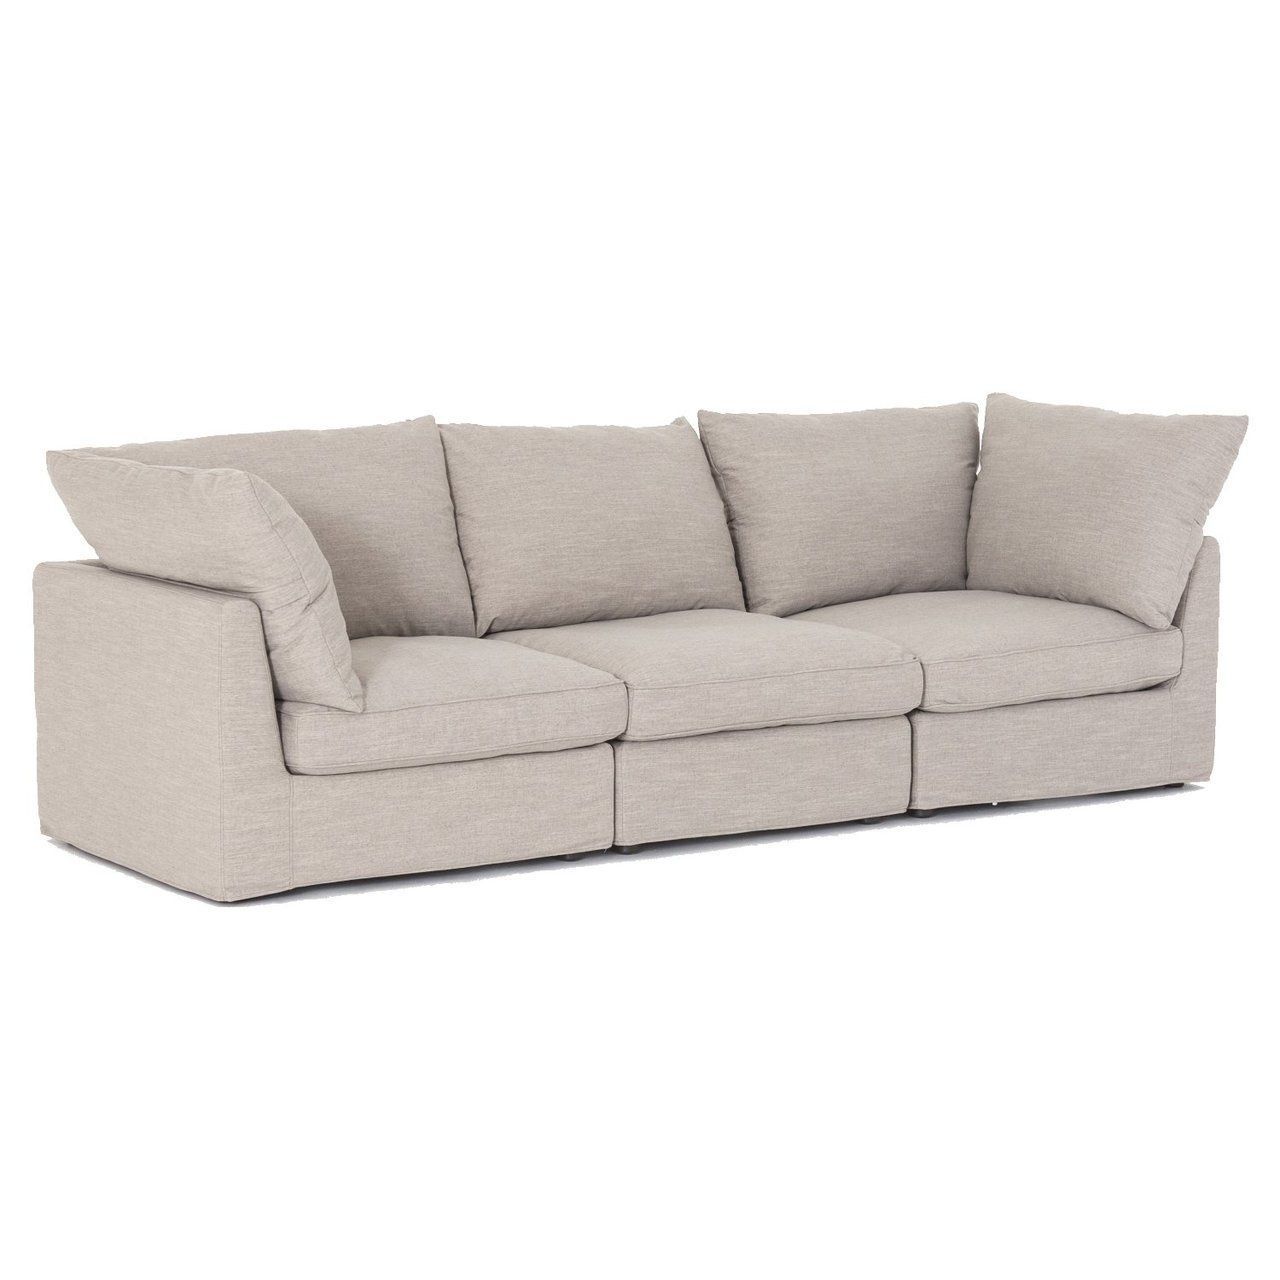 Harper Foam 3 Piece Sectional W/raf Chaise For Harper Foam 3 Piece Sectionals With Raf Chaise (View 13 of 30)